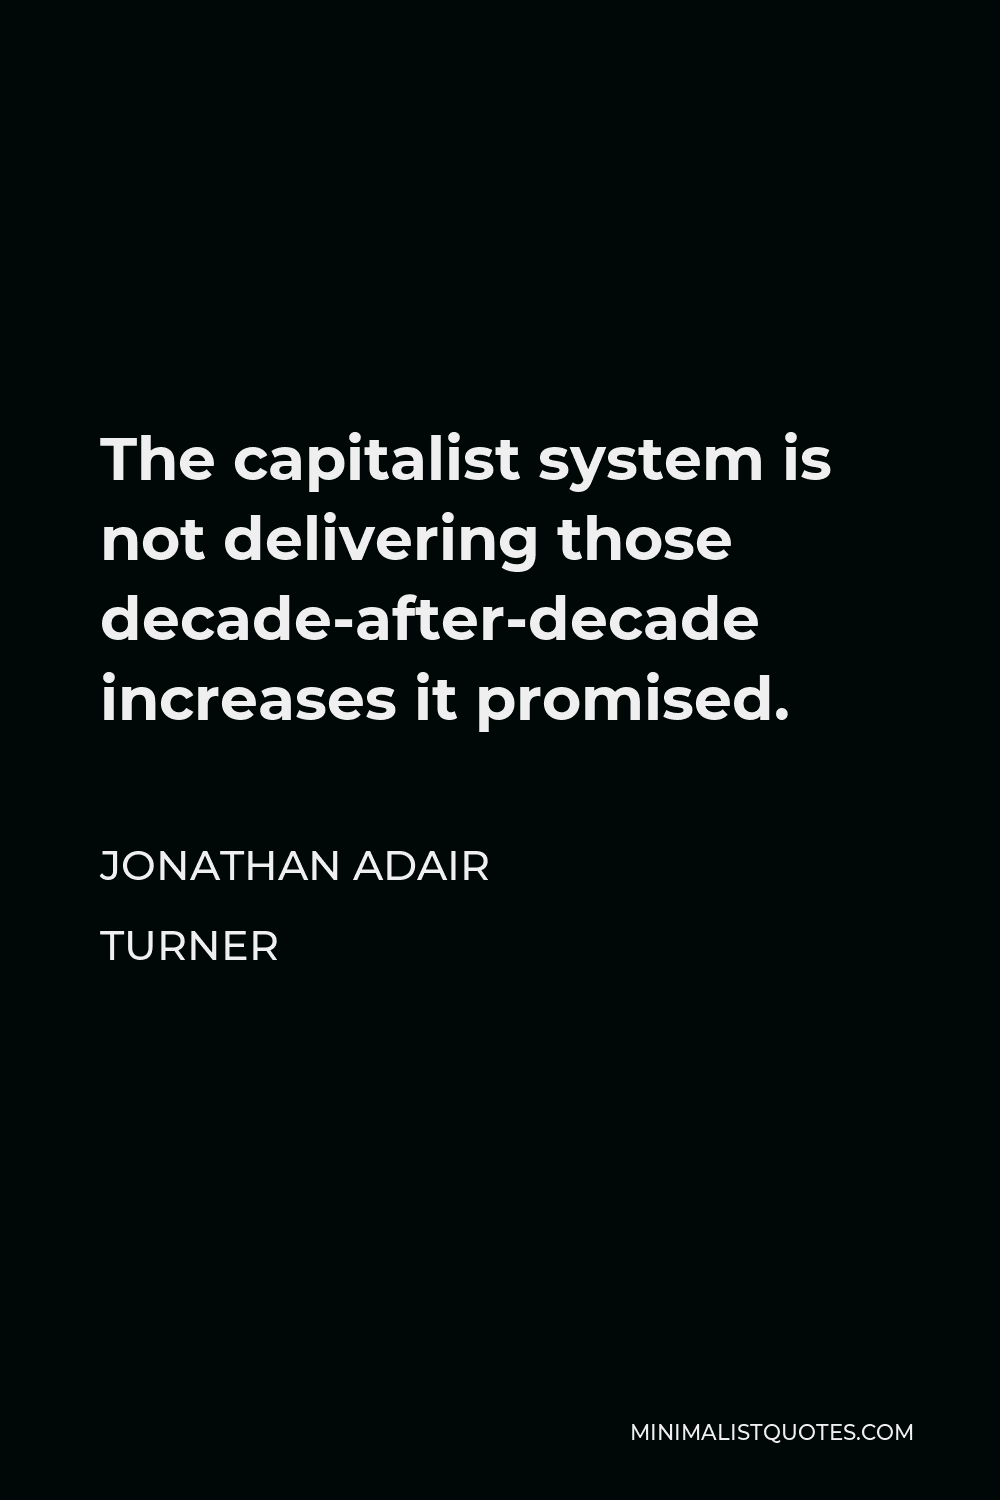 Jonathan Adair Turner Quote - The capitalist system is not delivering those decade-after-decade increases it promised.